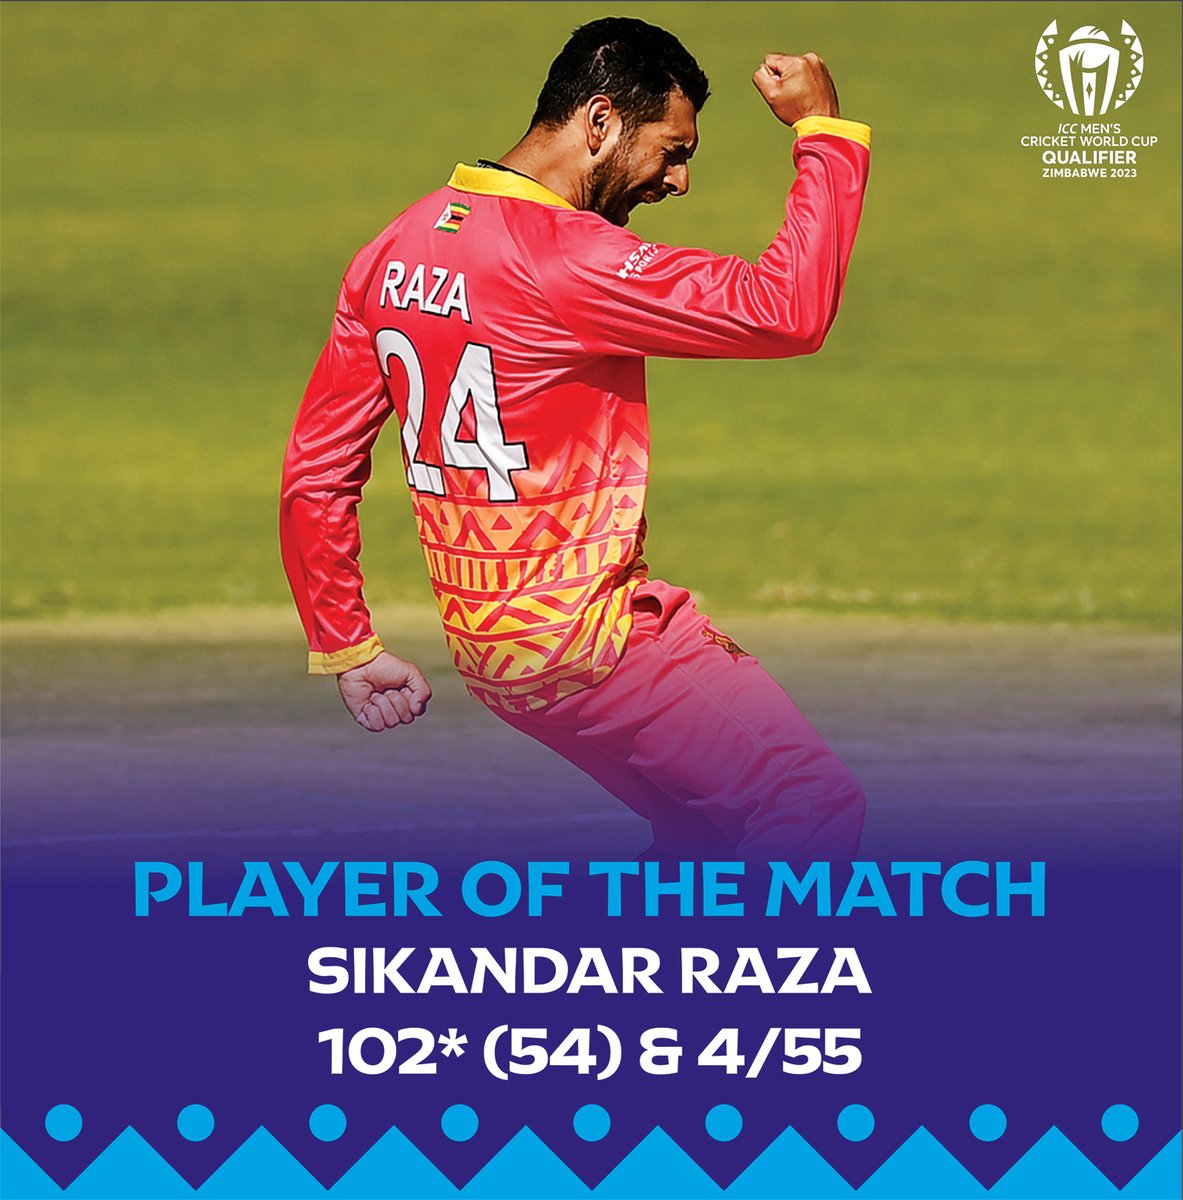 *⃣ 4/55 with the ball ☝️
*⃣ 102* off 54 with the bat 🏏 

For his brilliant display in #ZIMvNED,@SRazaB24 is the @aramco Player of the Match 👏 

#CWC23